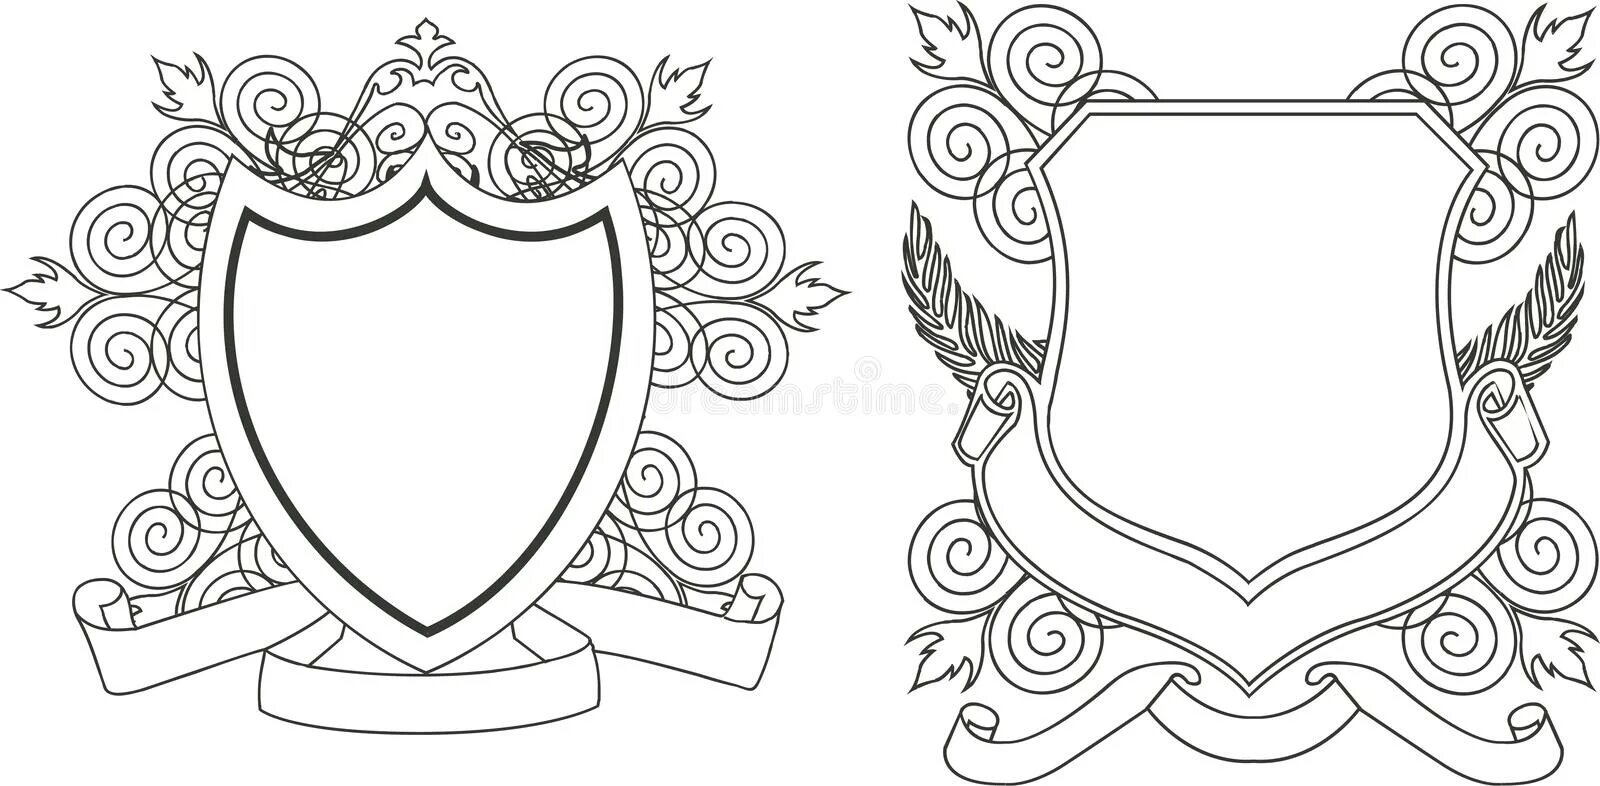 Family coat of arms #3